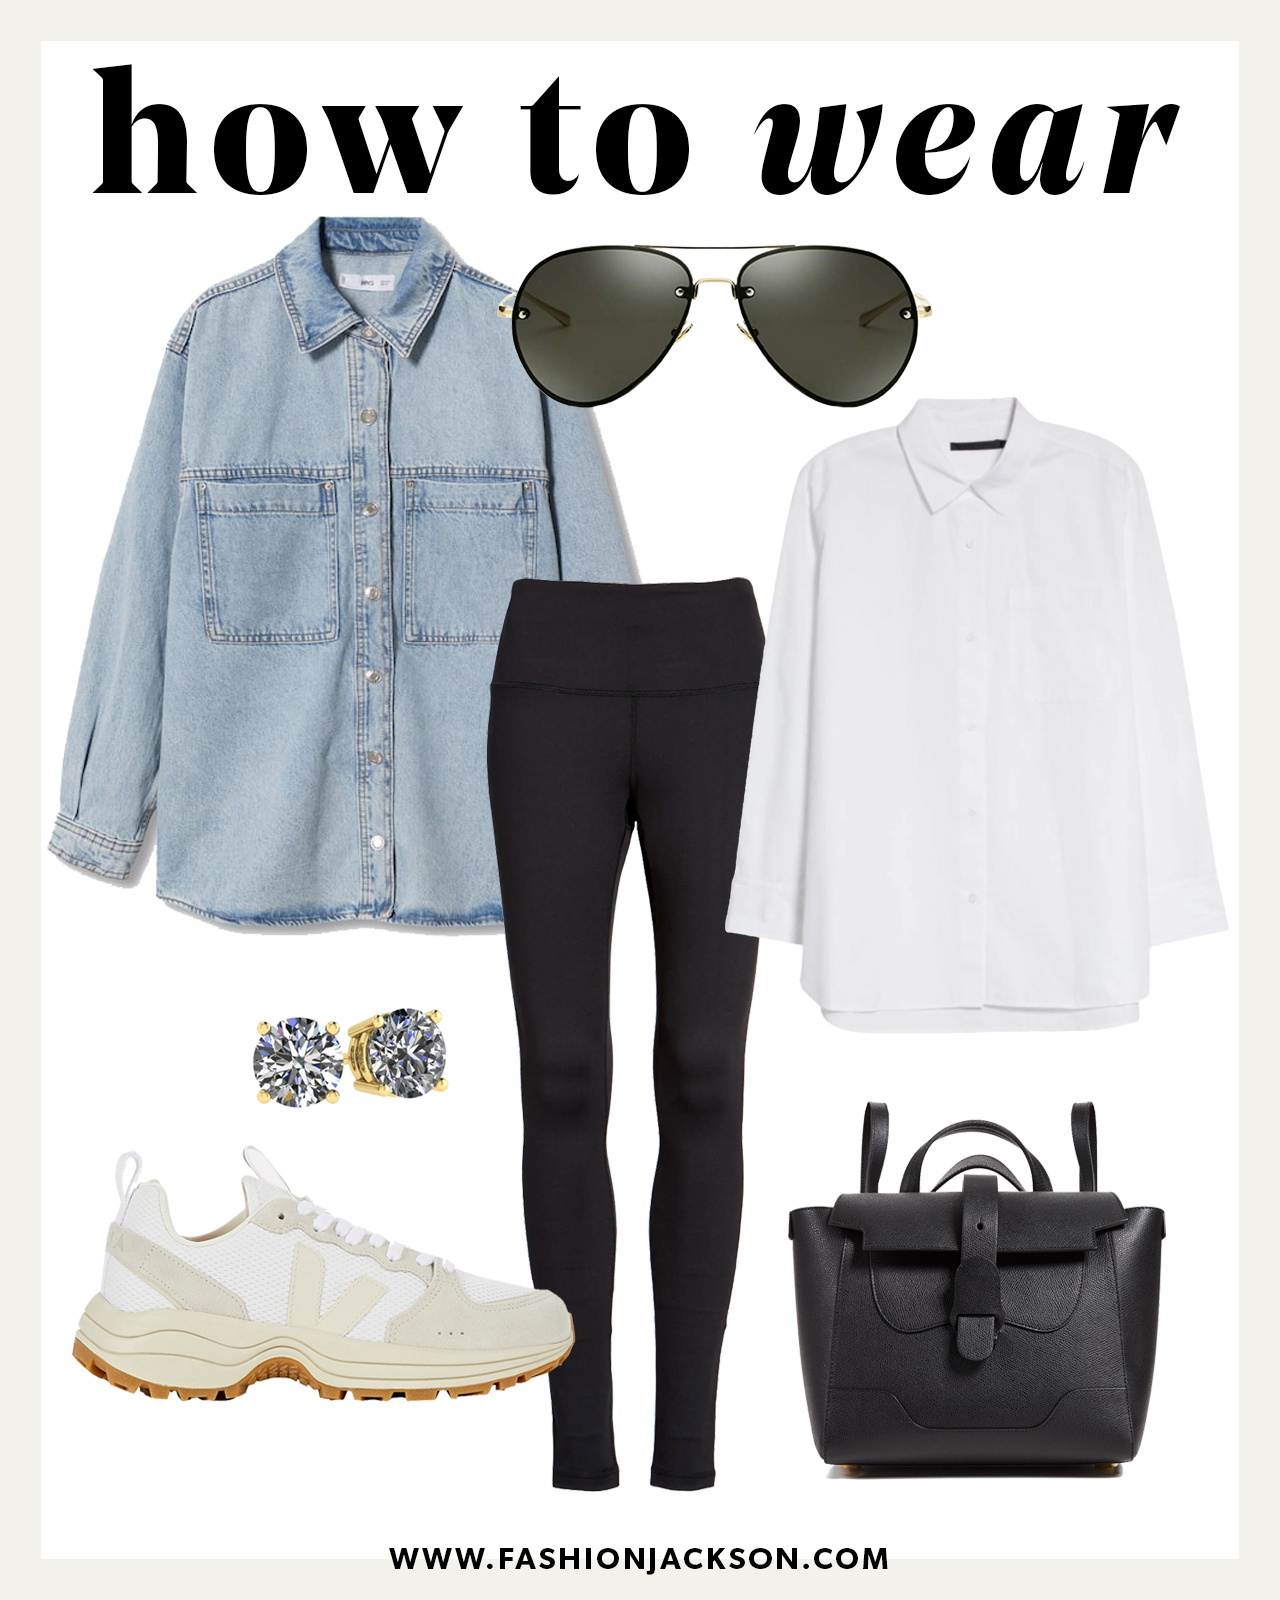 white button up shirt outfit idea